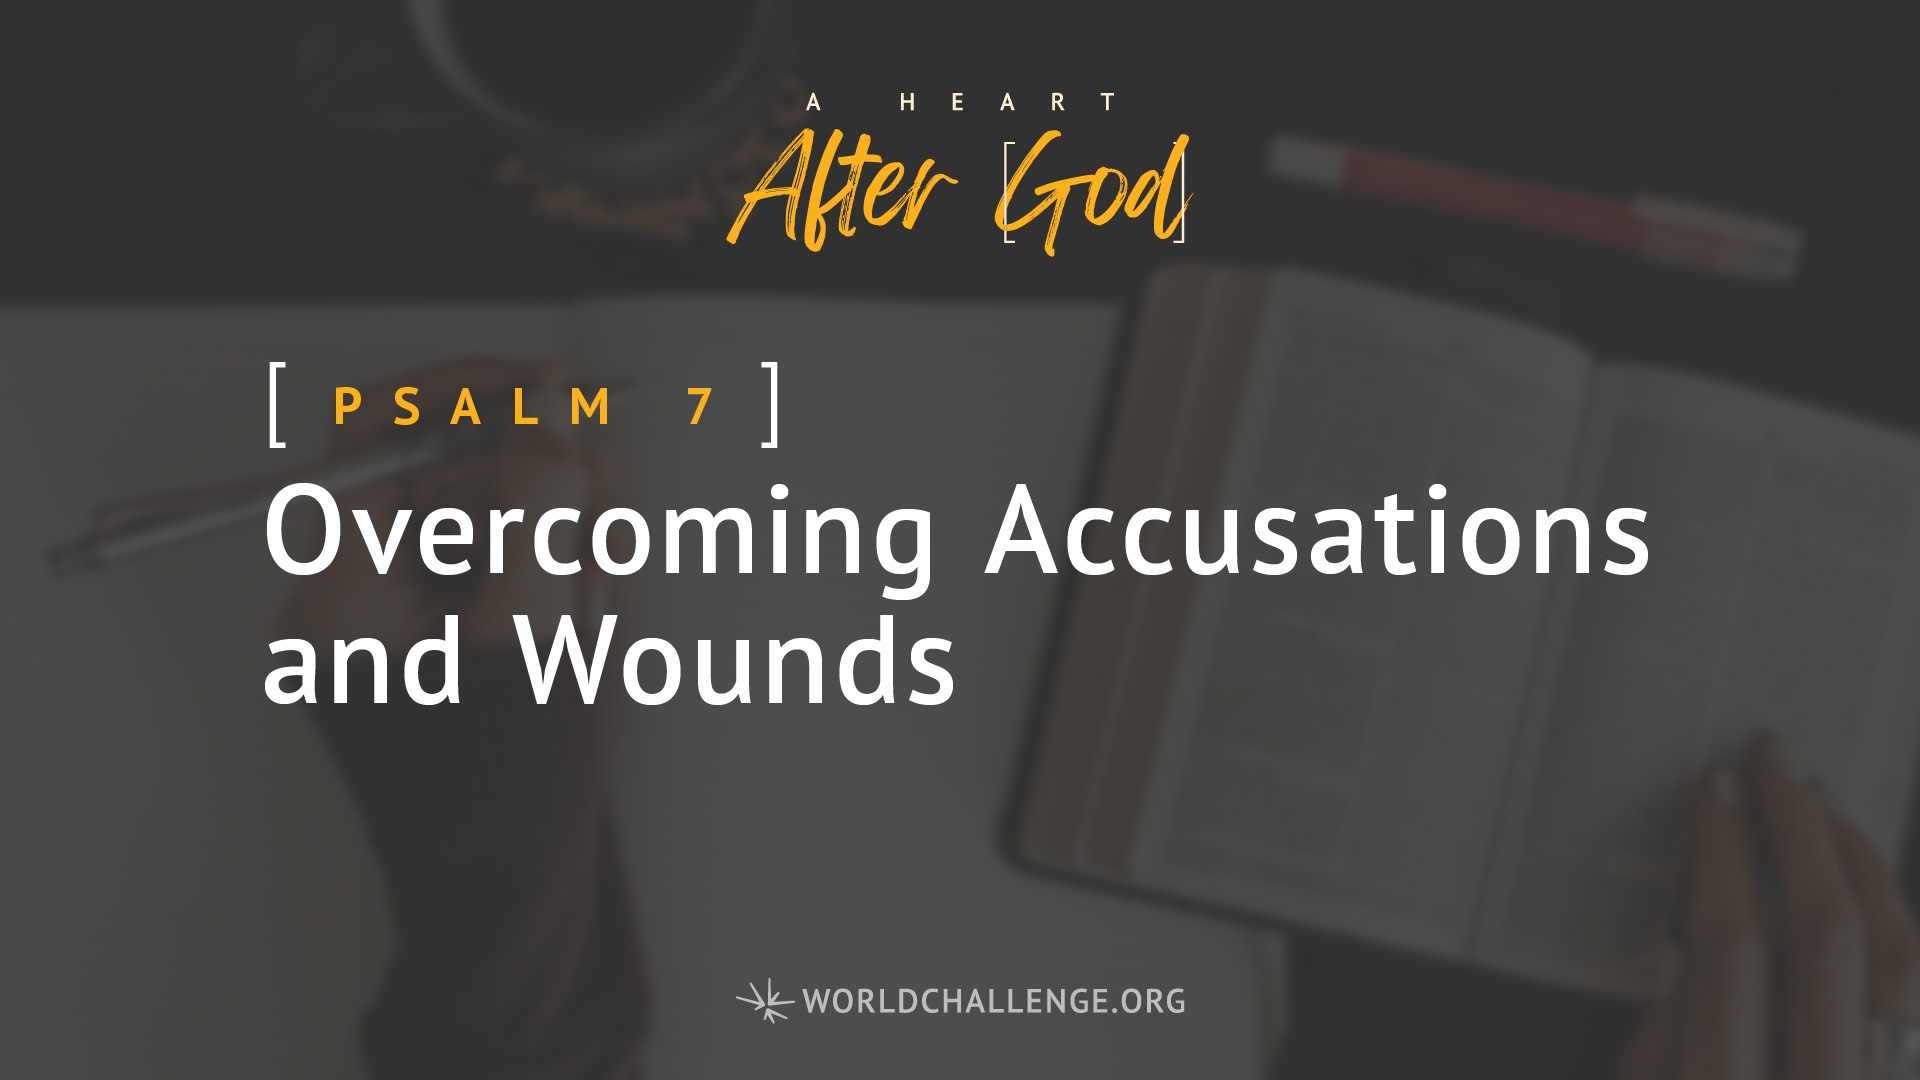 Psalm 7 - Overcoming Accusations and Wounds